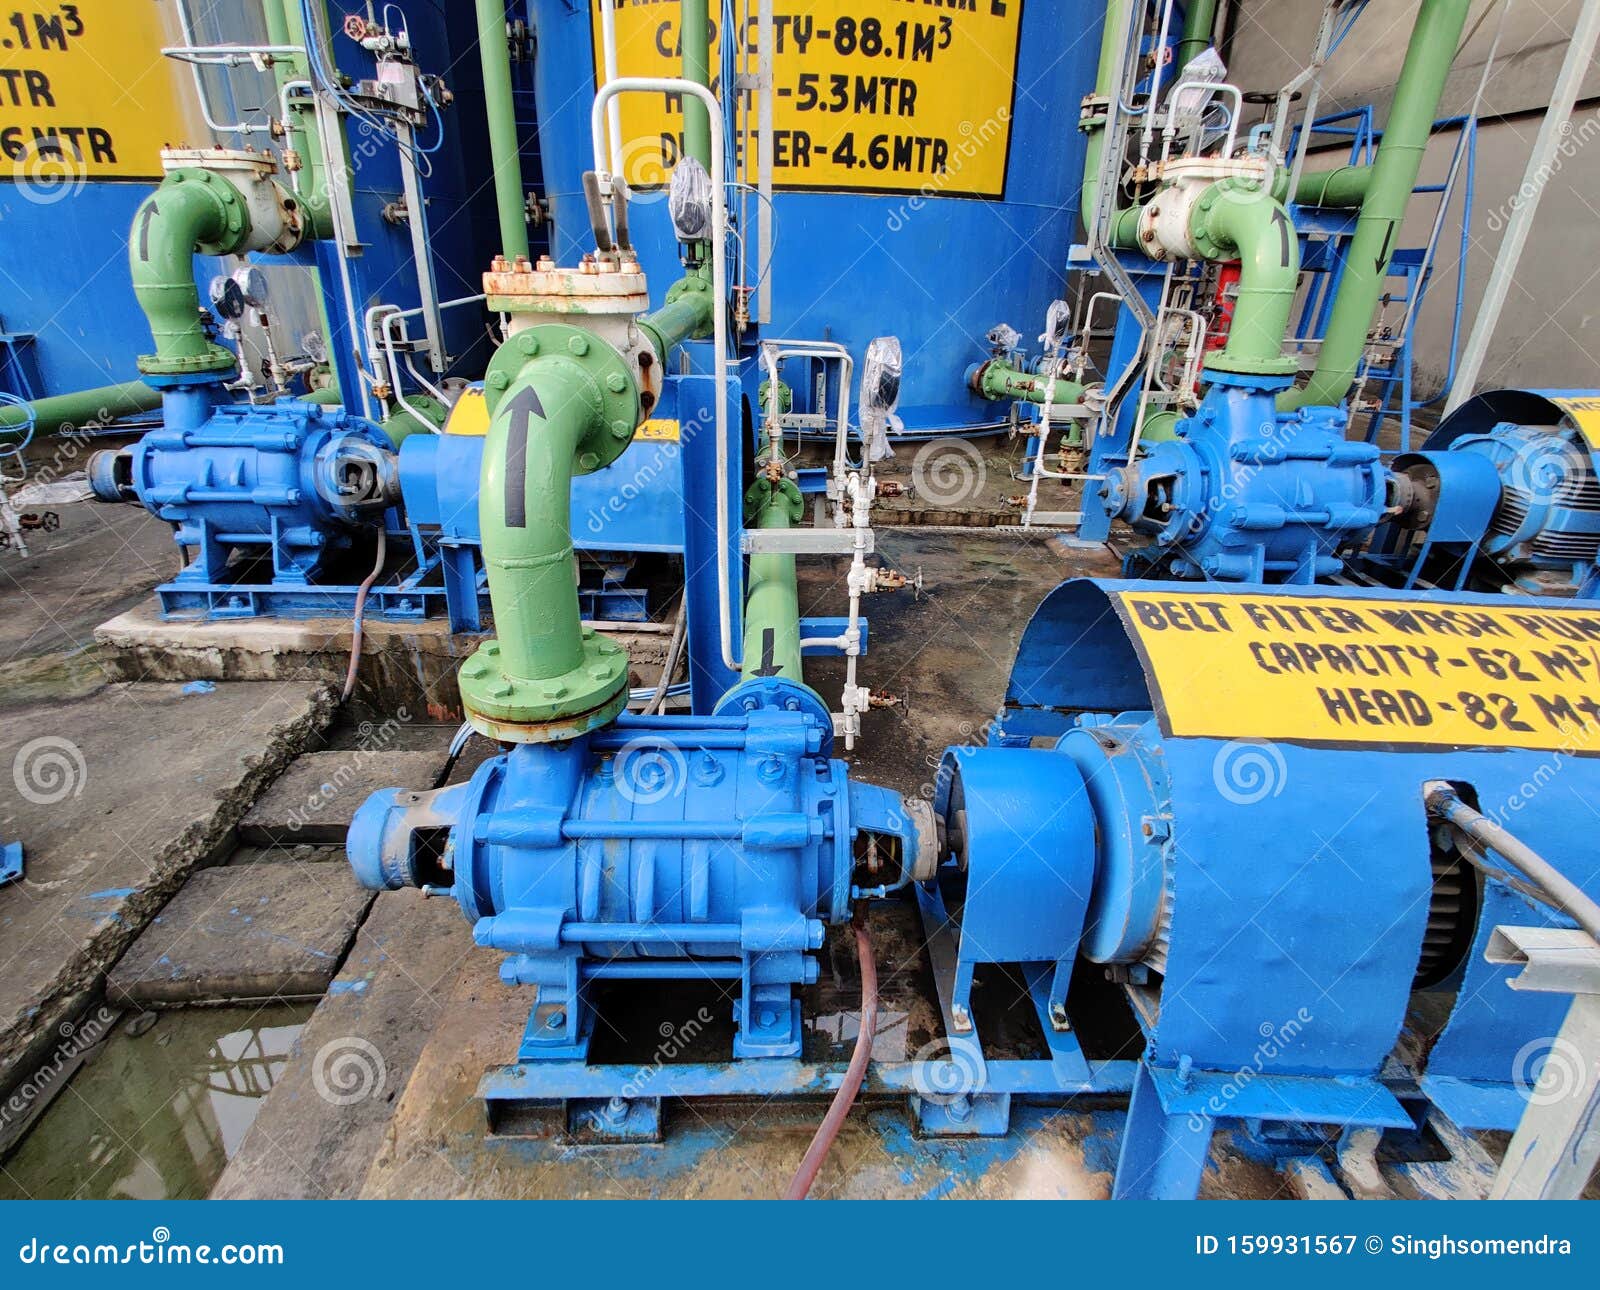 Many Industrial Pumps Valves Motor in Blue Stock Image - Image of fuel, electricity: